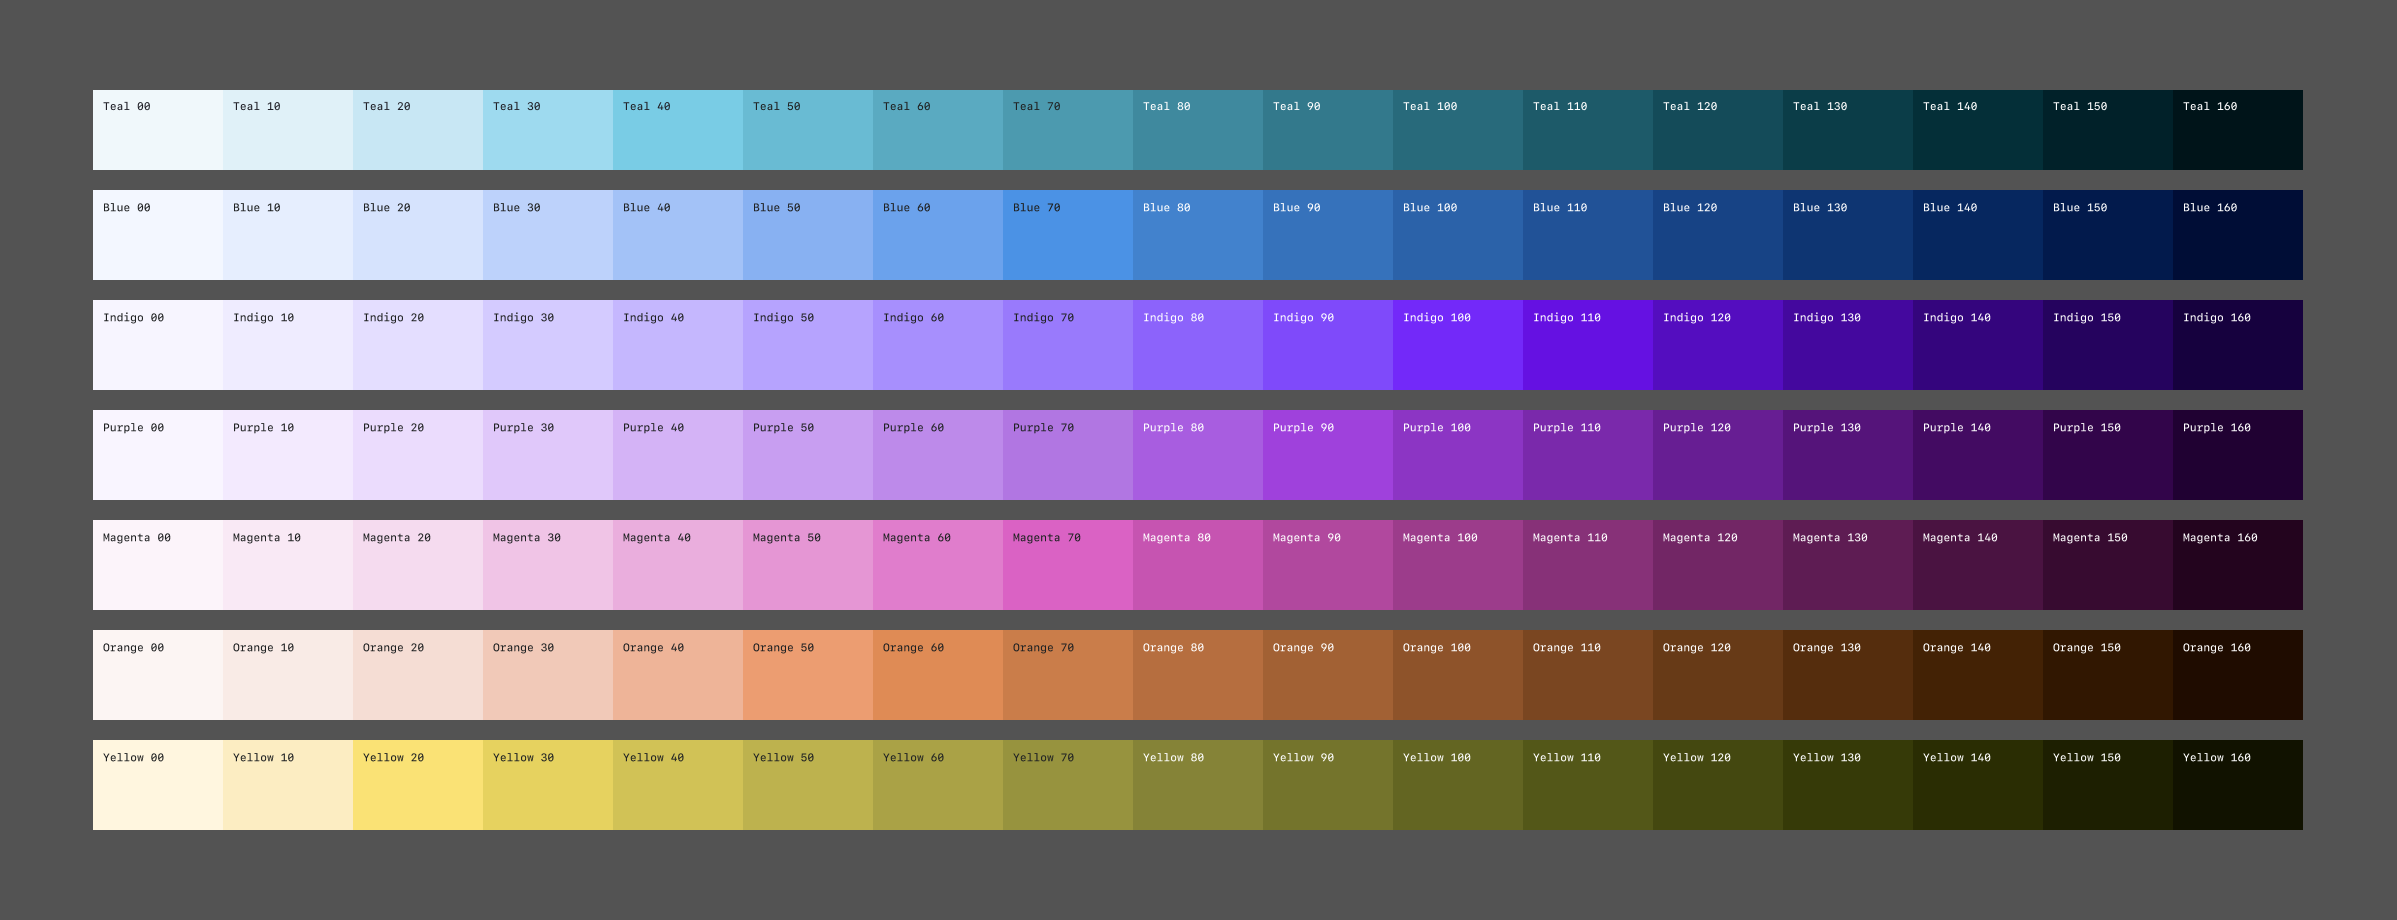 Flexible colors and themes for data visualizations | by Miru | Shopify UX